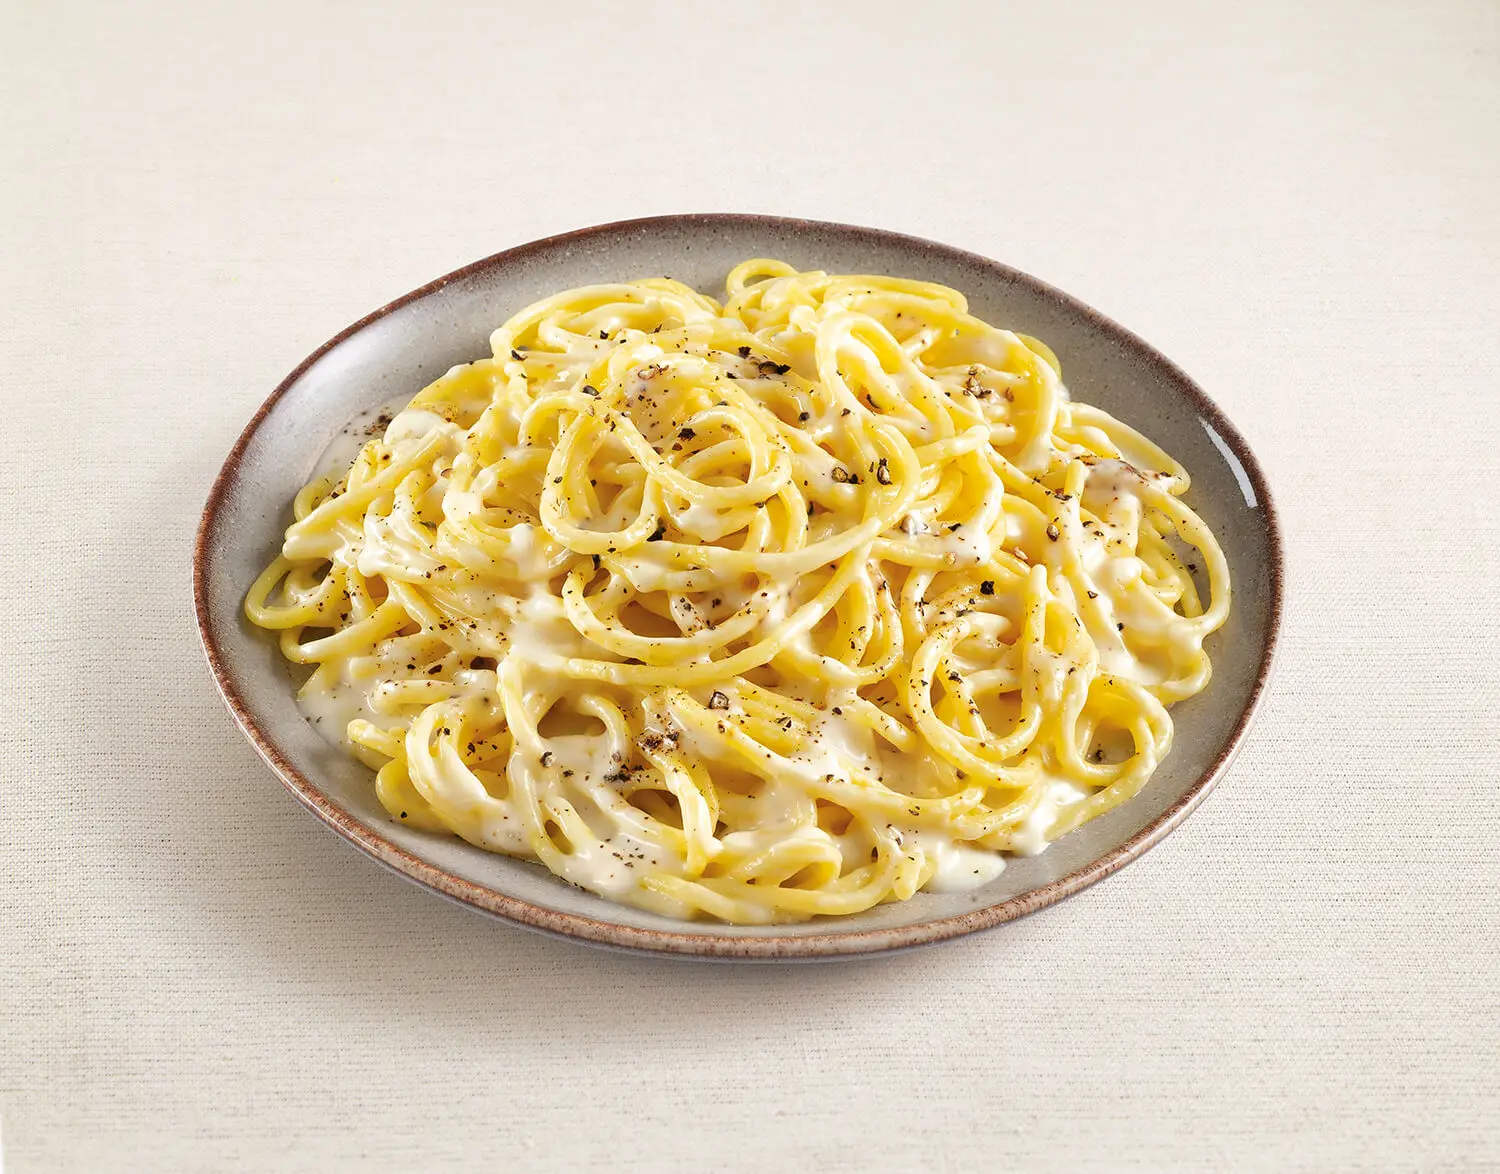 Spaghetti with cheese and pepper